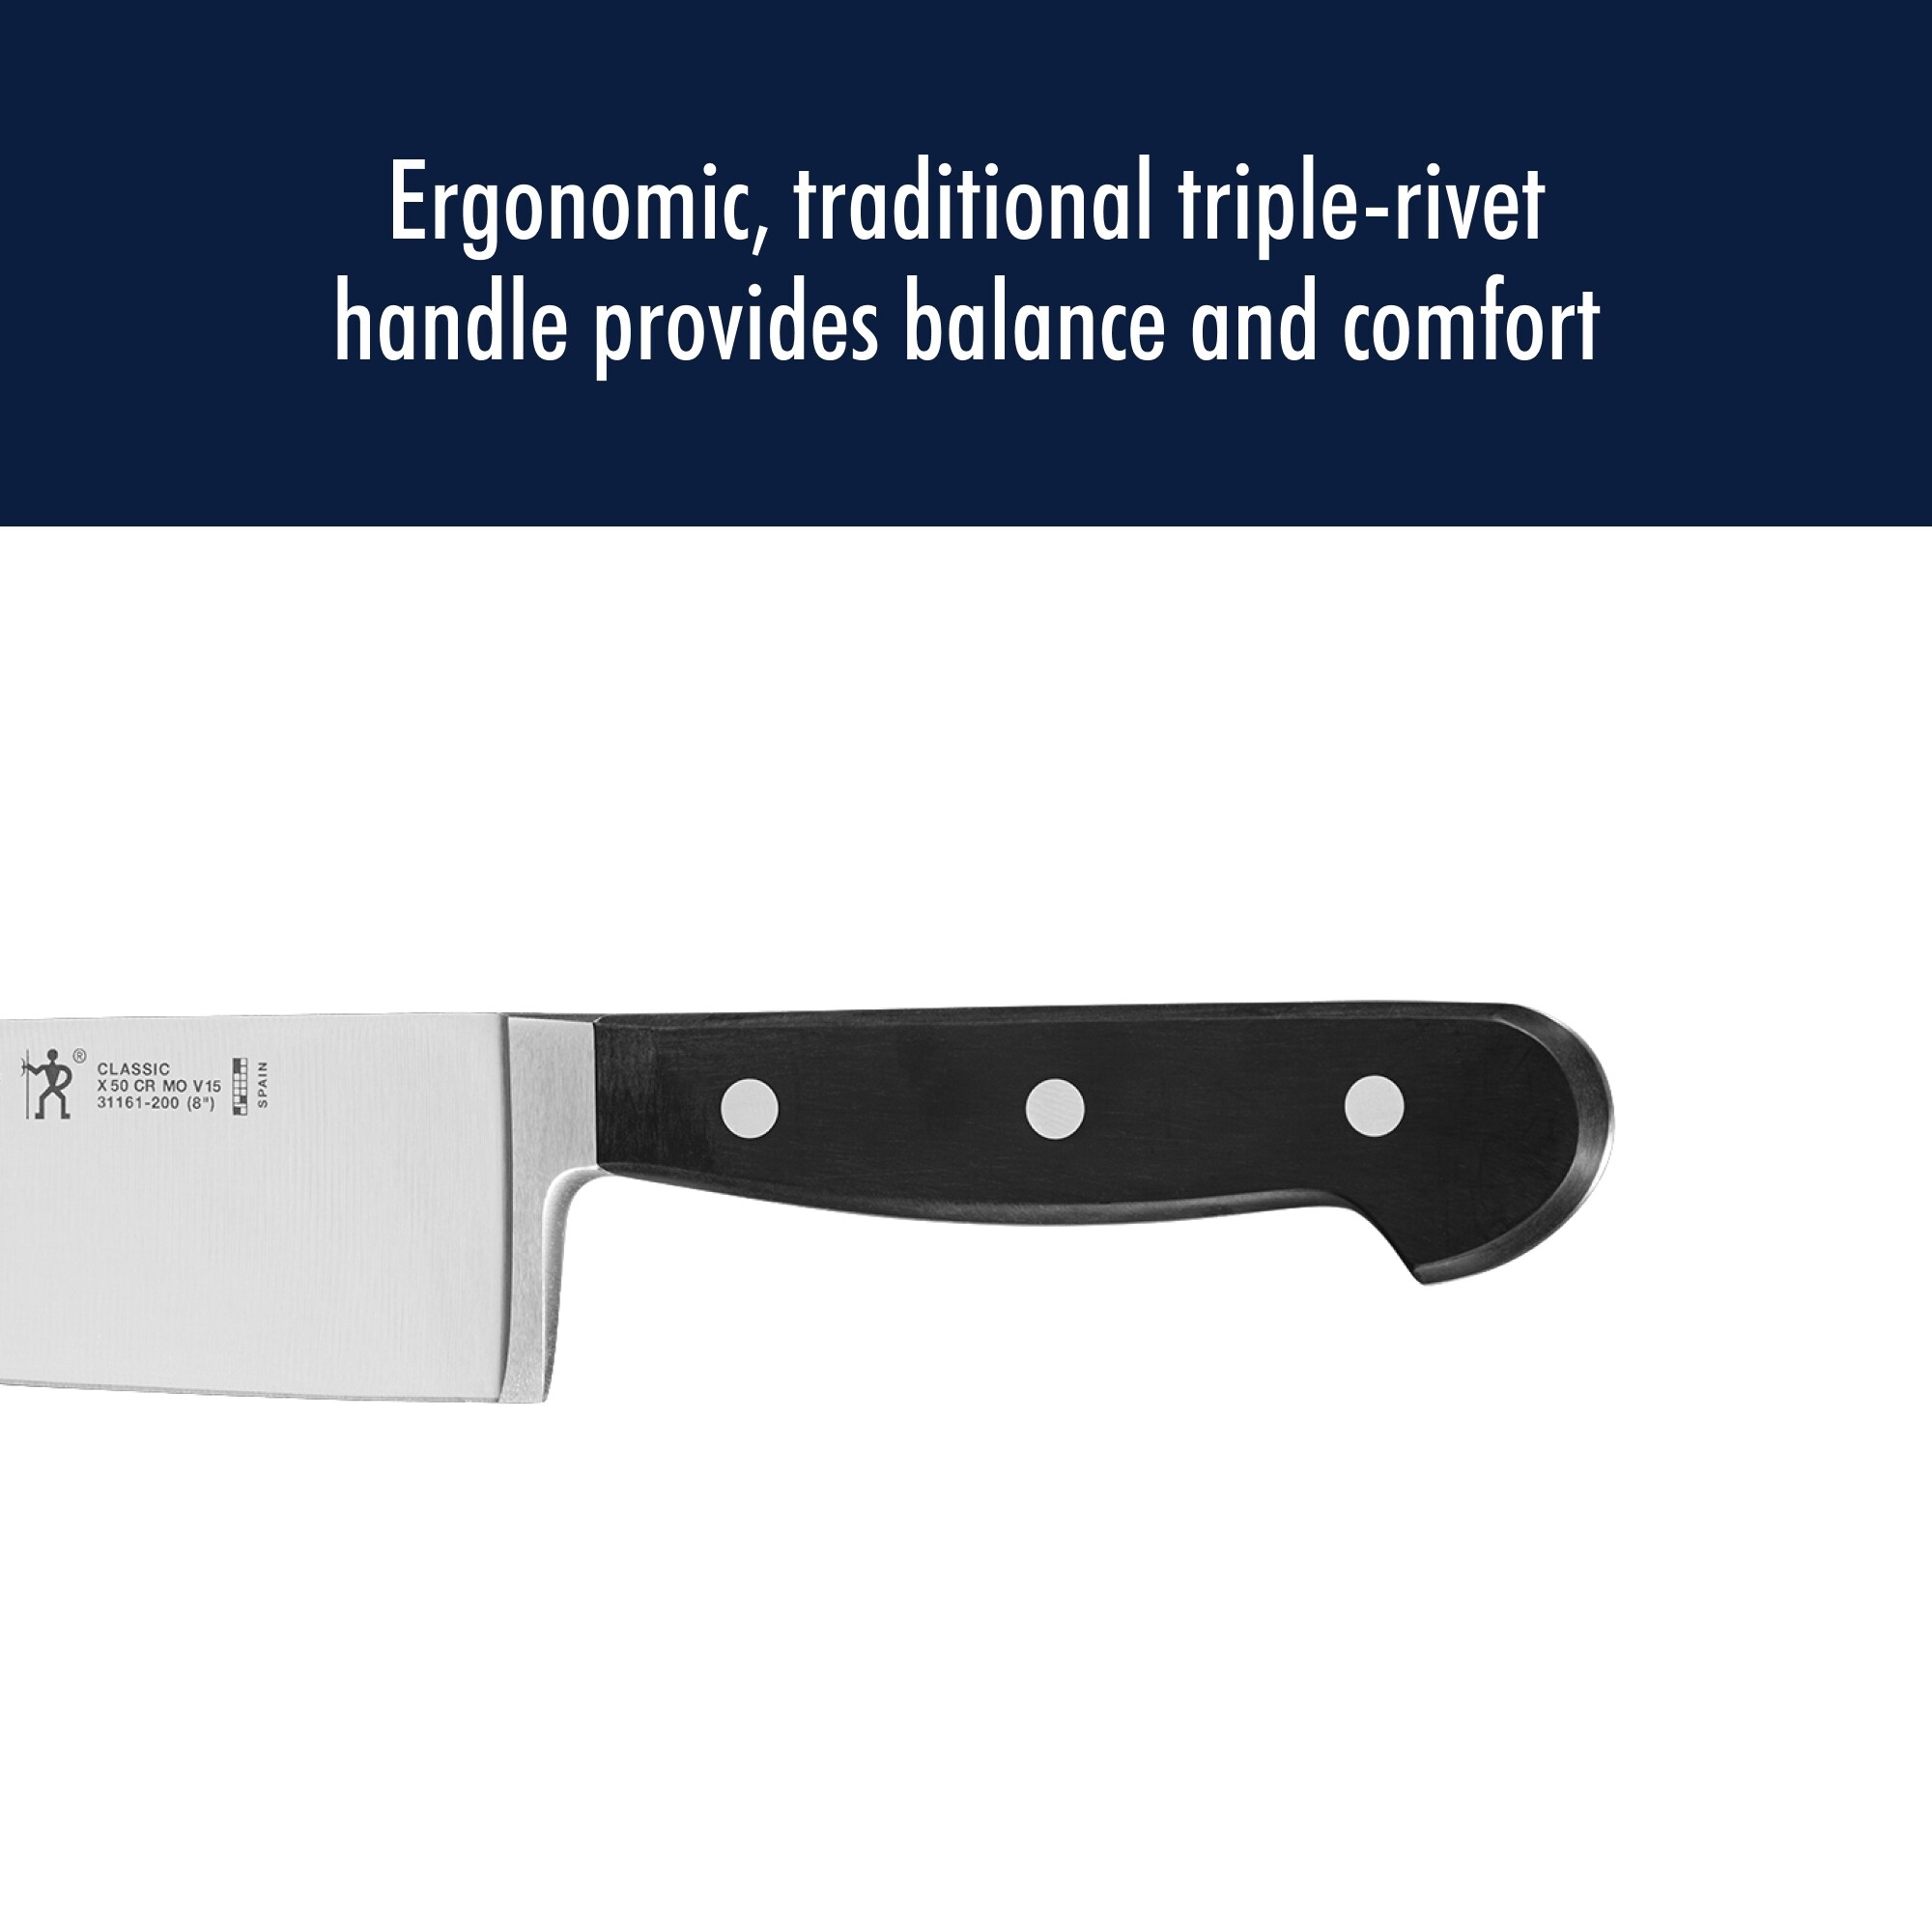 HENCKELS CLASSIC Chef's Knife - On Sale - Bed Bath & Beyond - 14291502